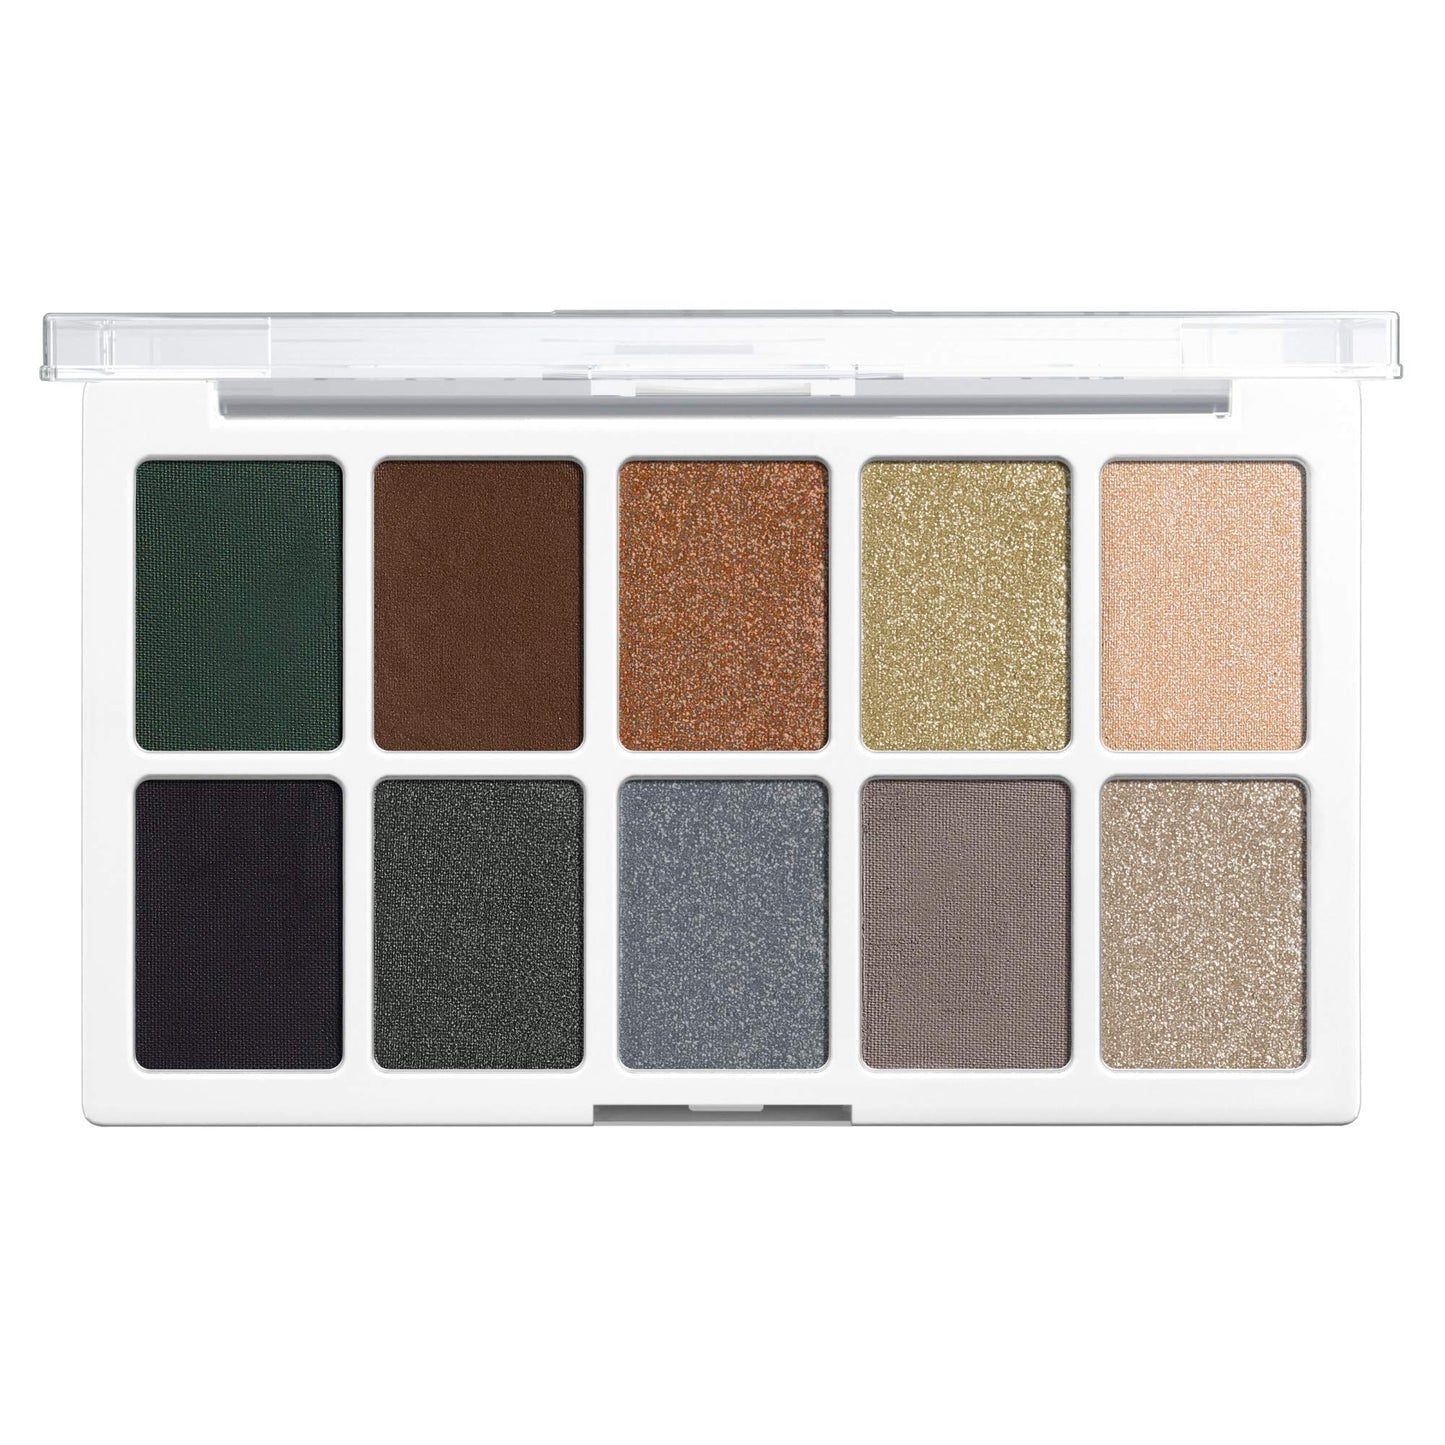 Wet n Wild Color Icon 10-Pan Makeup Palette Lights Off 0.42 Ounce 0.42 Ounce (Pack of 1)